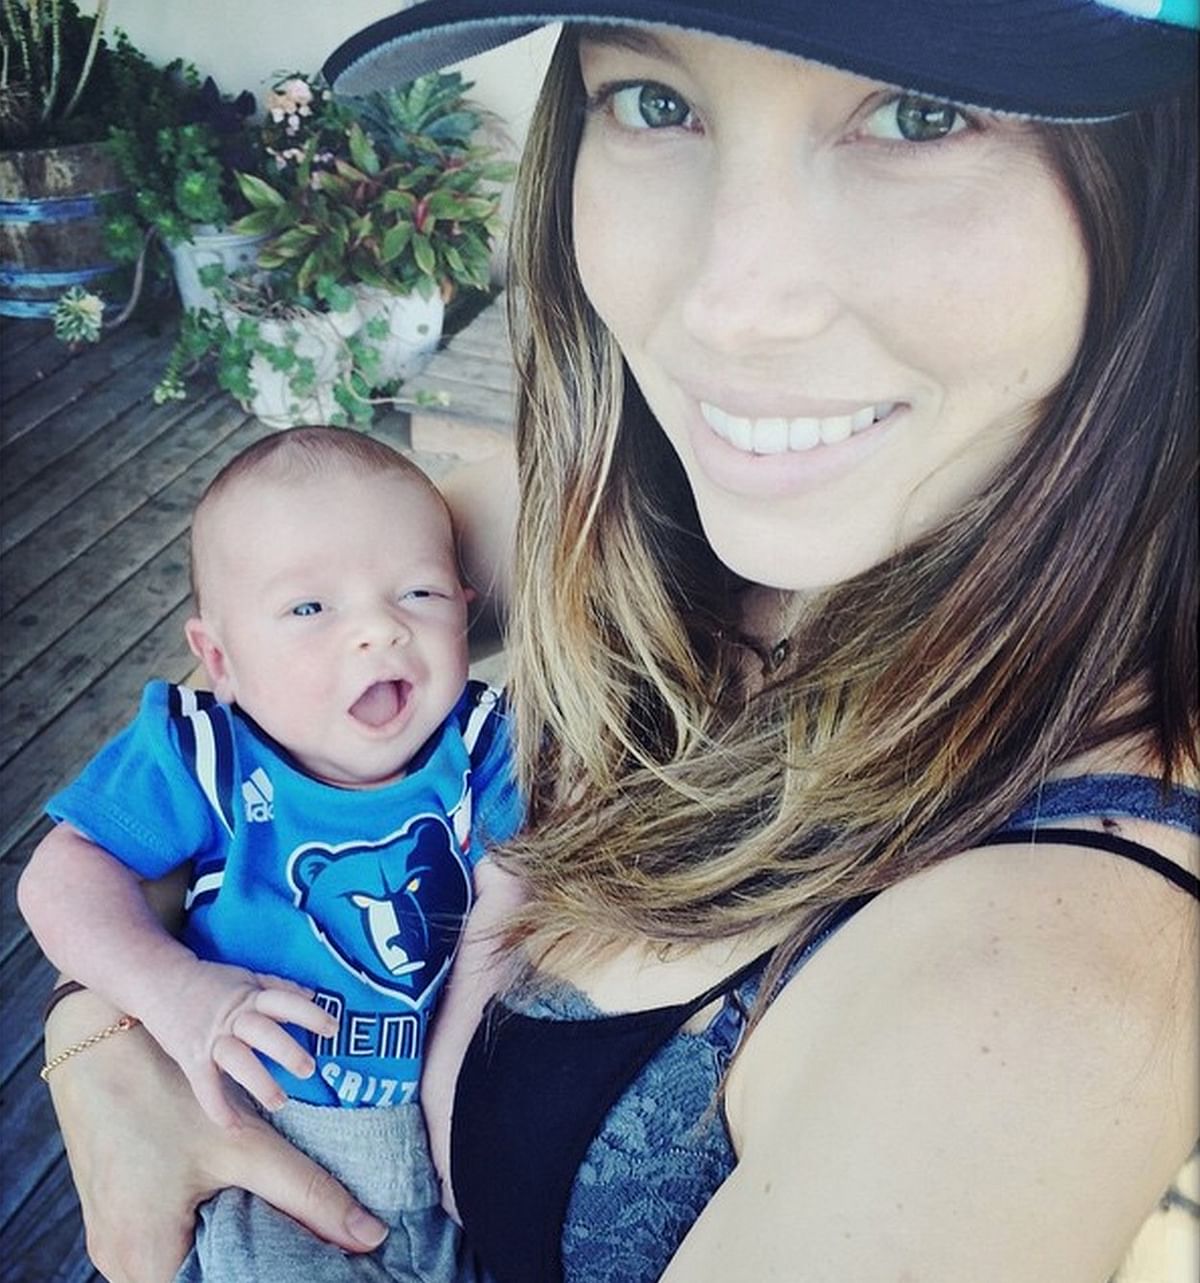 Justin Timberlake shared his new born son’s first pic on Instagram. How cute is this!